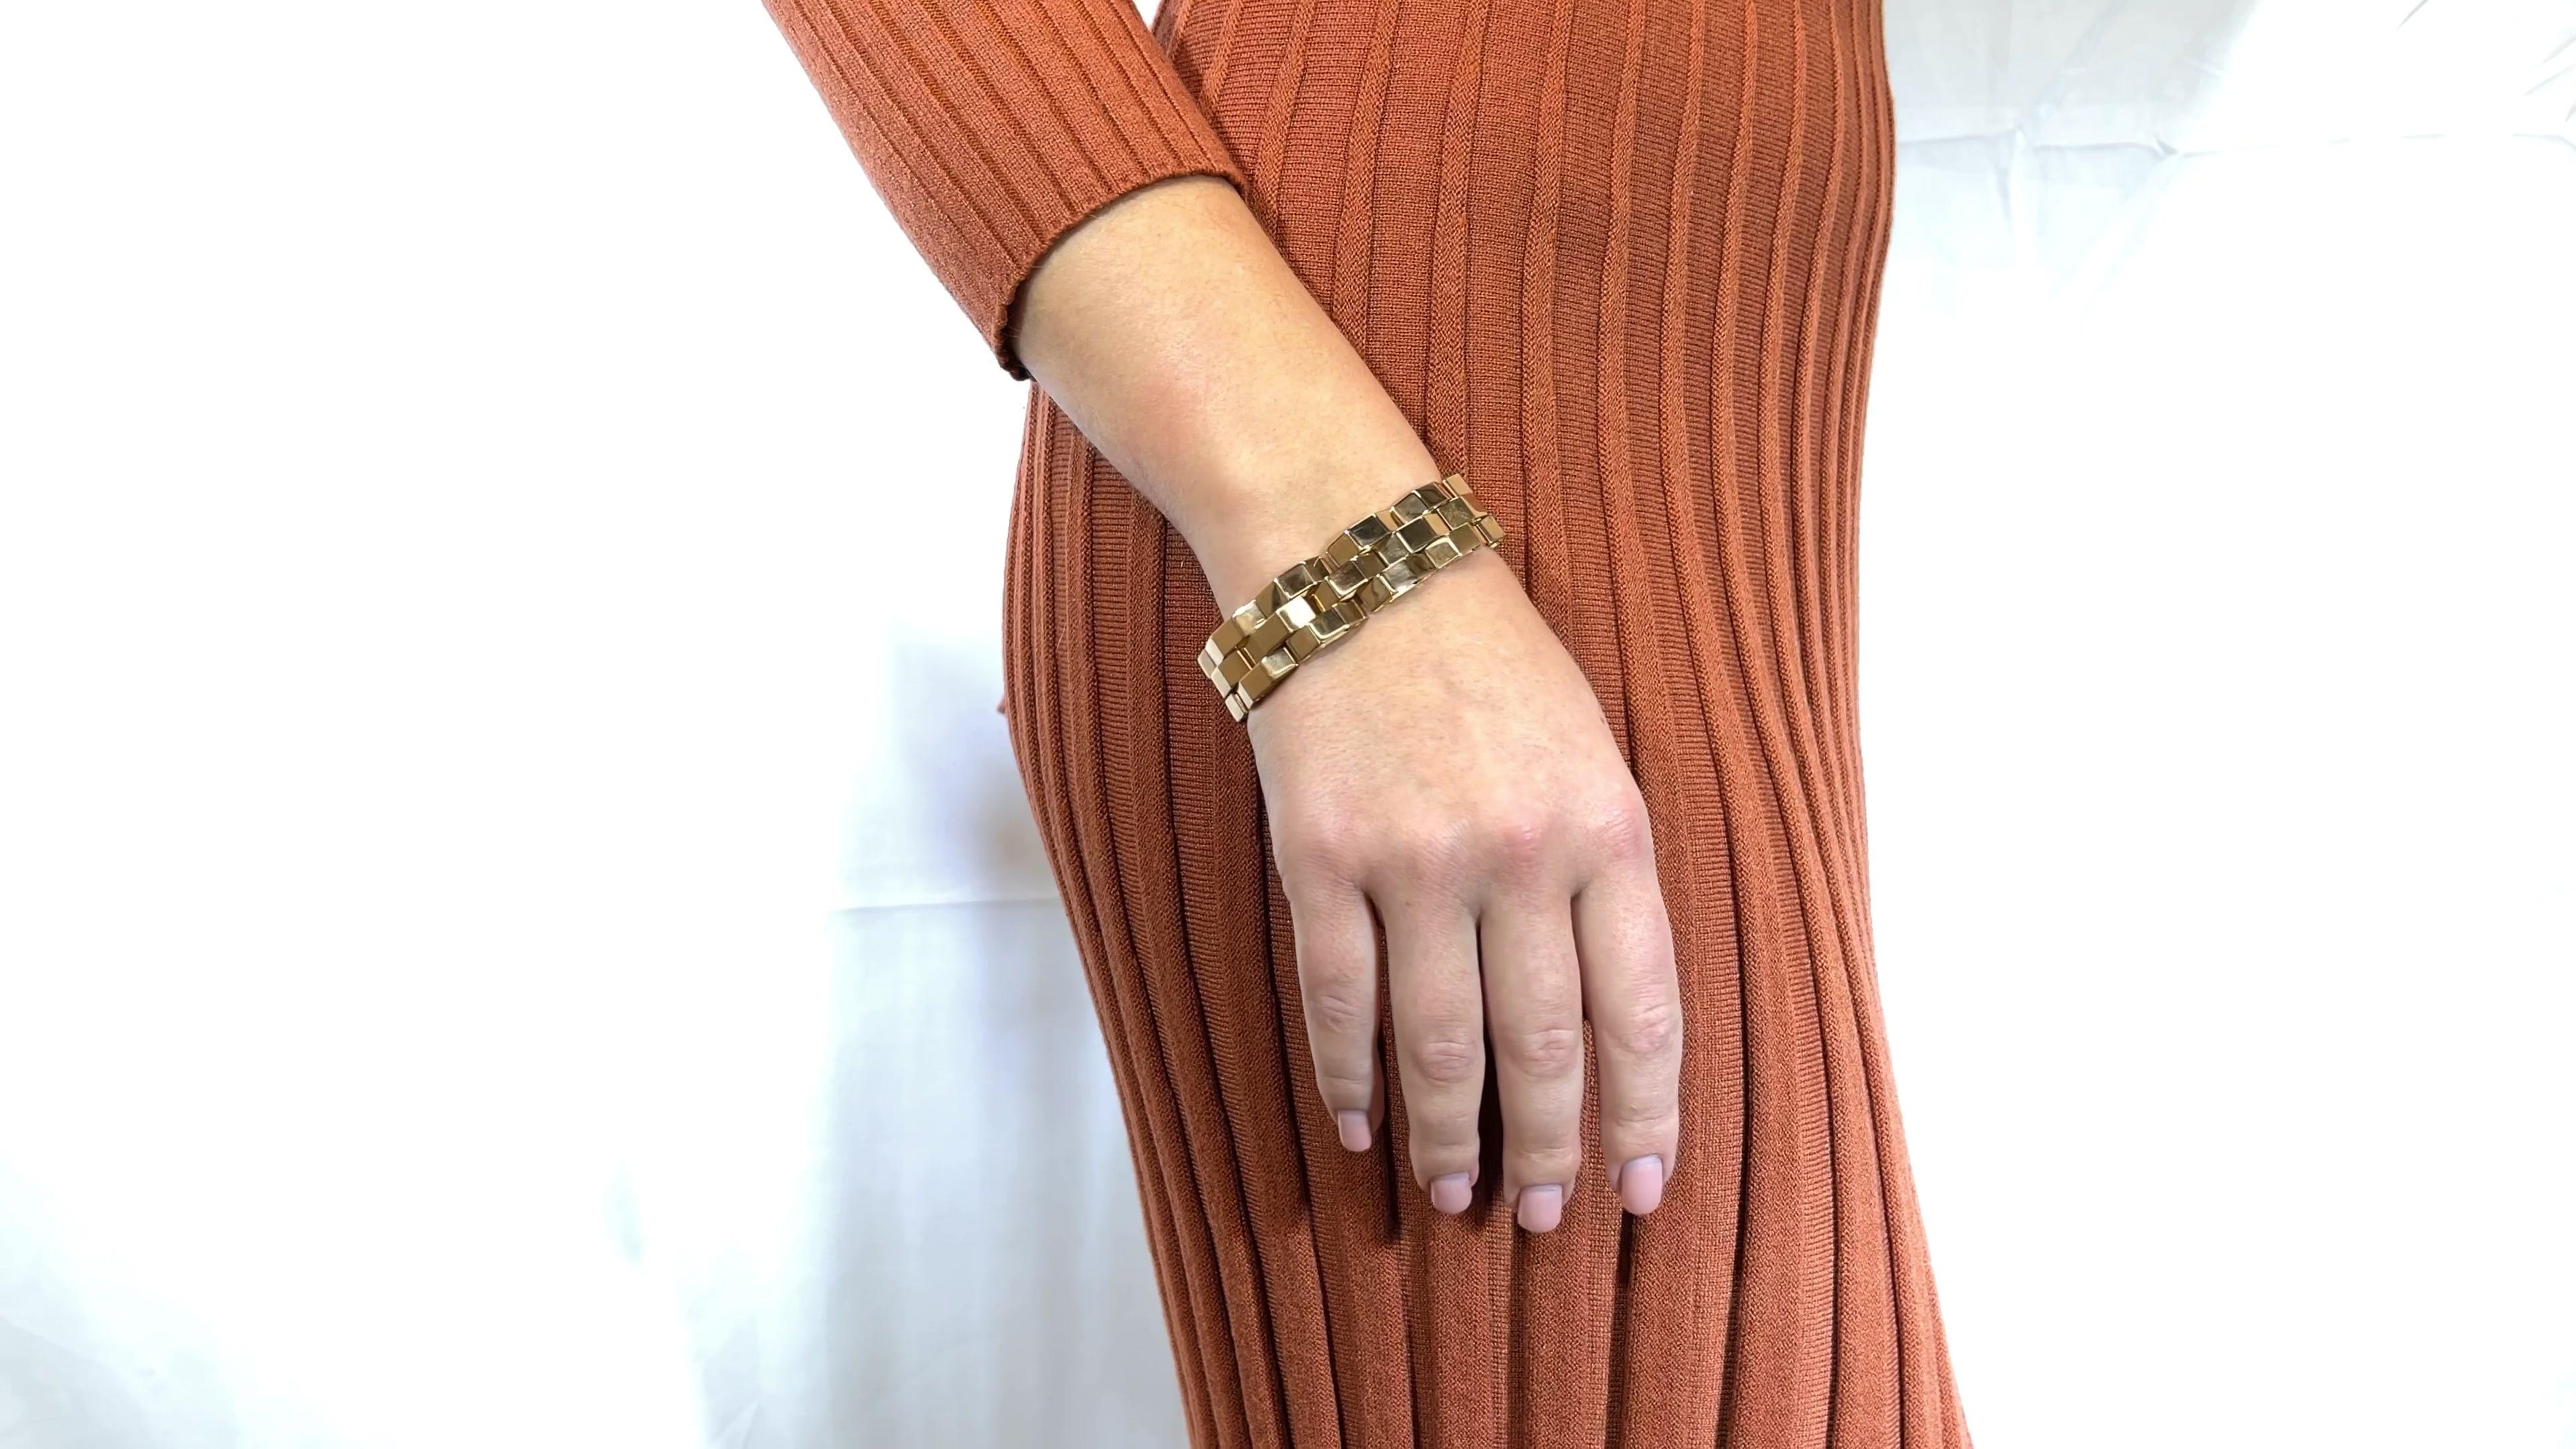 One Retro French 18k Rose Gold Tank Bracelet. Crafted in 18 karat gold with French hallmarks and maker's mark, weighing 86 grams and measuring 6 1/2 inches in length. Circa 1940s.

About The Piece: Do you like a bold gold look? You're in luck